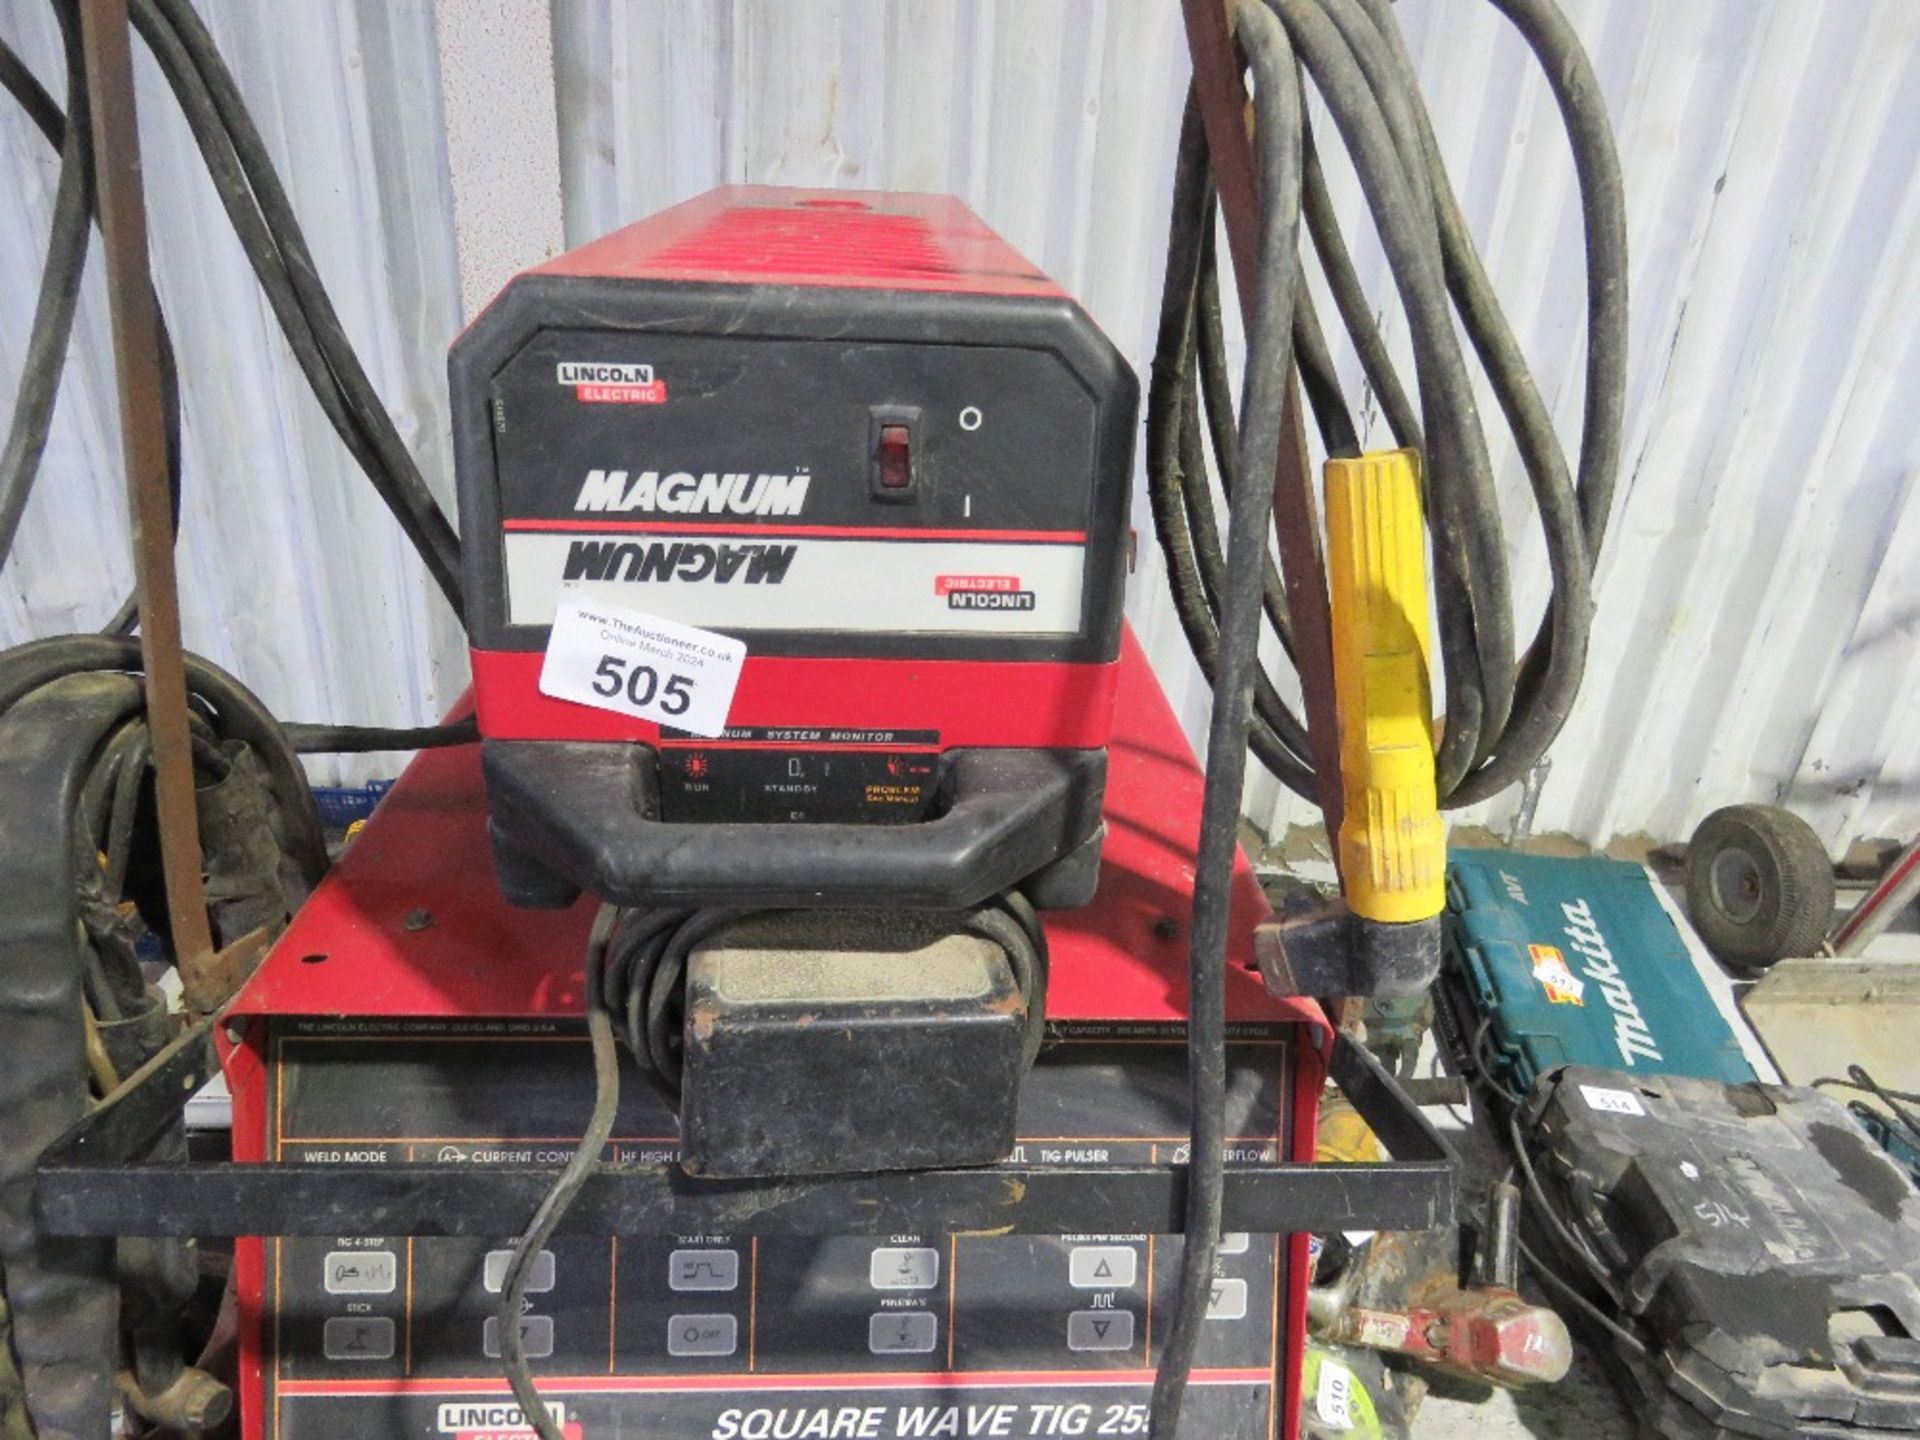 LINCOLN SQUARE WAVE TIG255 WELDER WITH MAGNUM UNIT, 3 PHASE. THIS LOT IS SOLD UNDER THE AUCTIONEE - Image 4 of 7